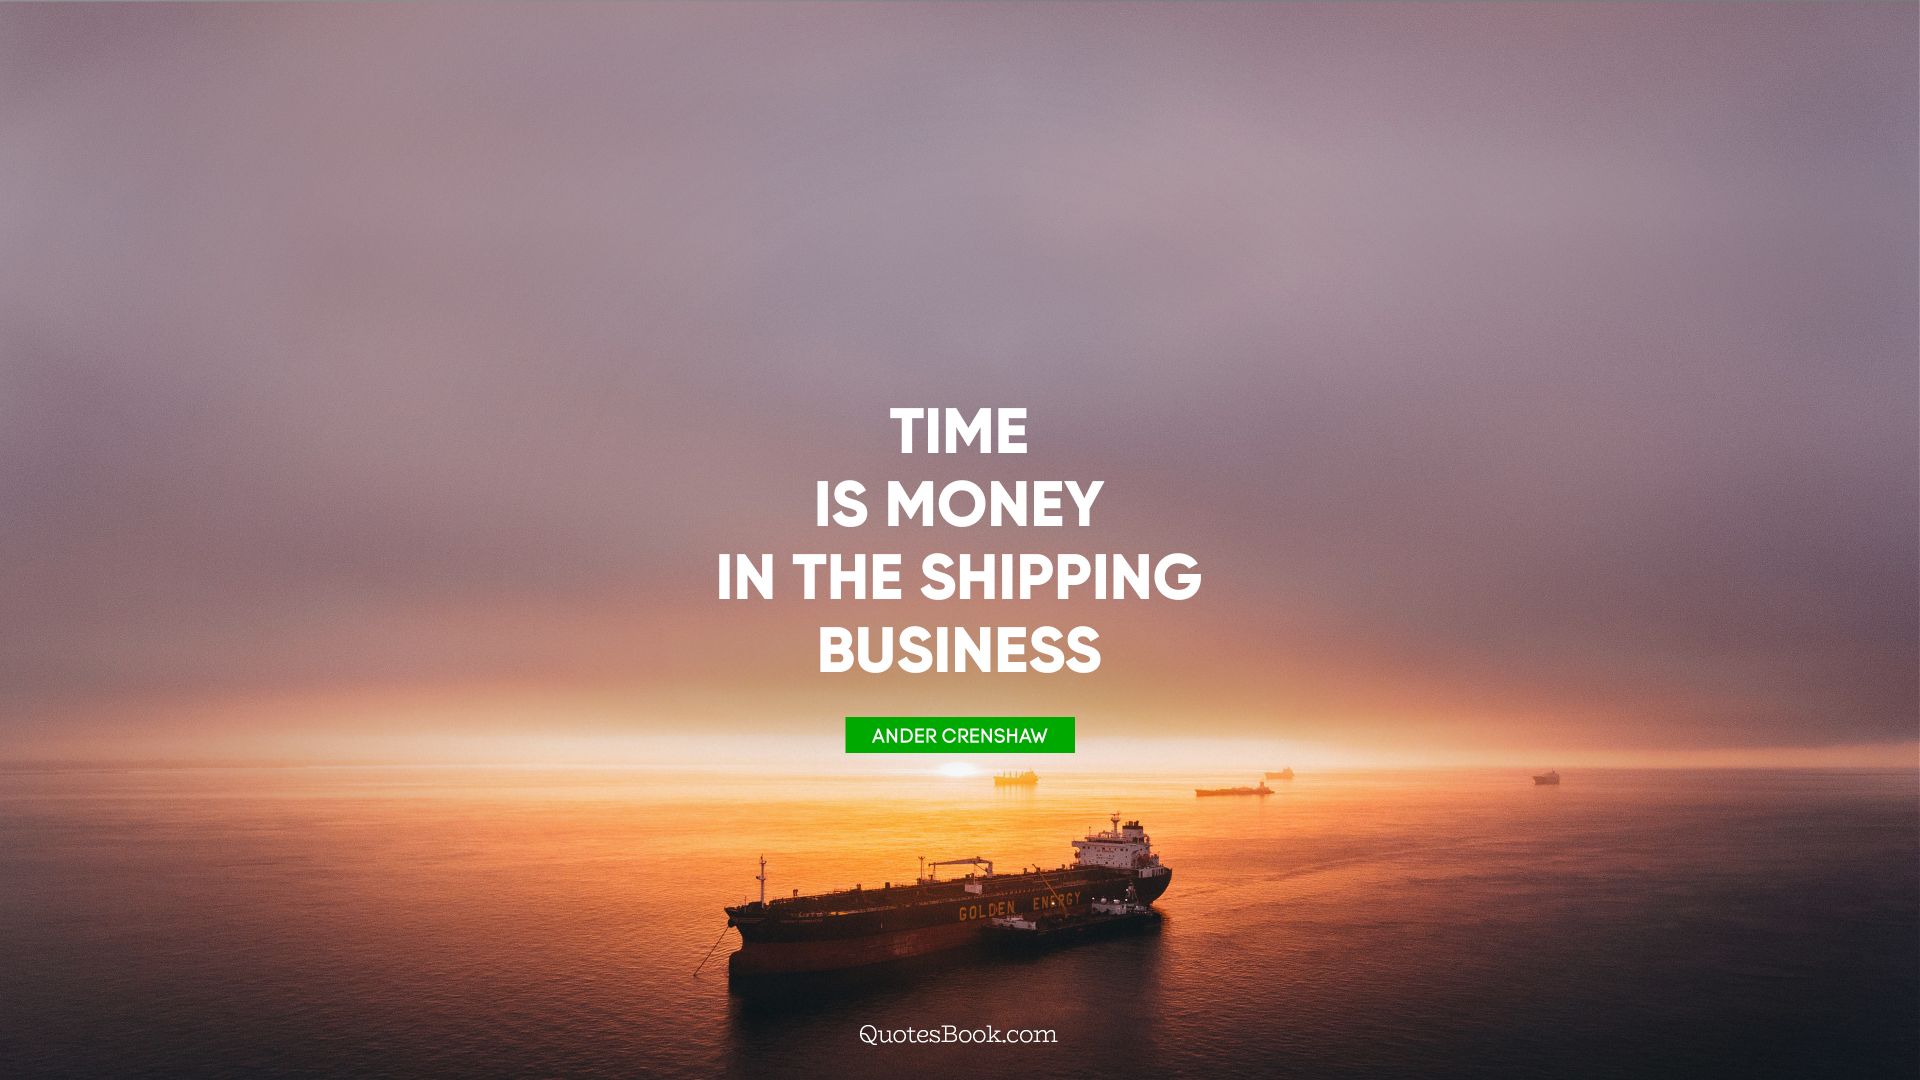 Time is money in the shipping business. - Quote by Ander Crenshaw